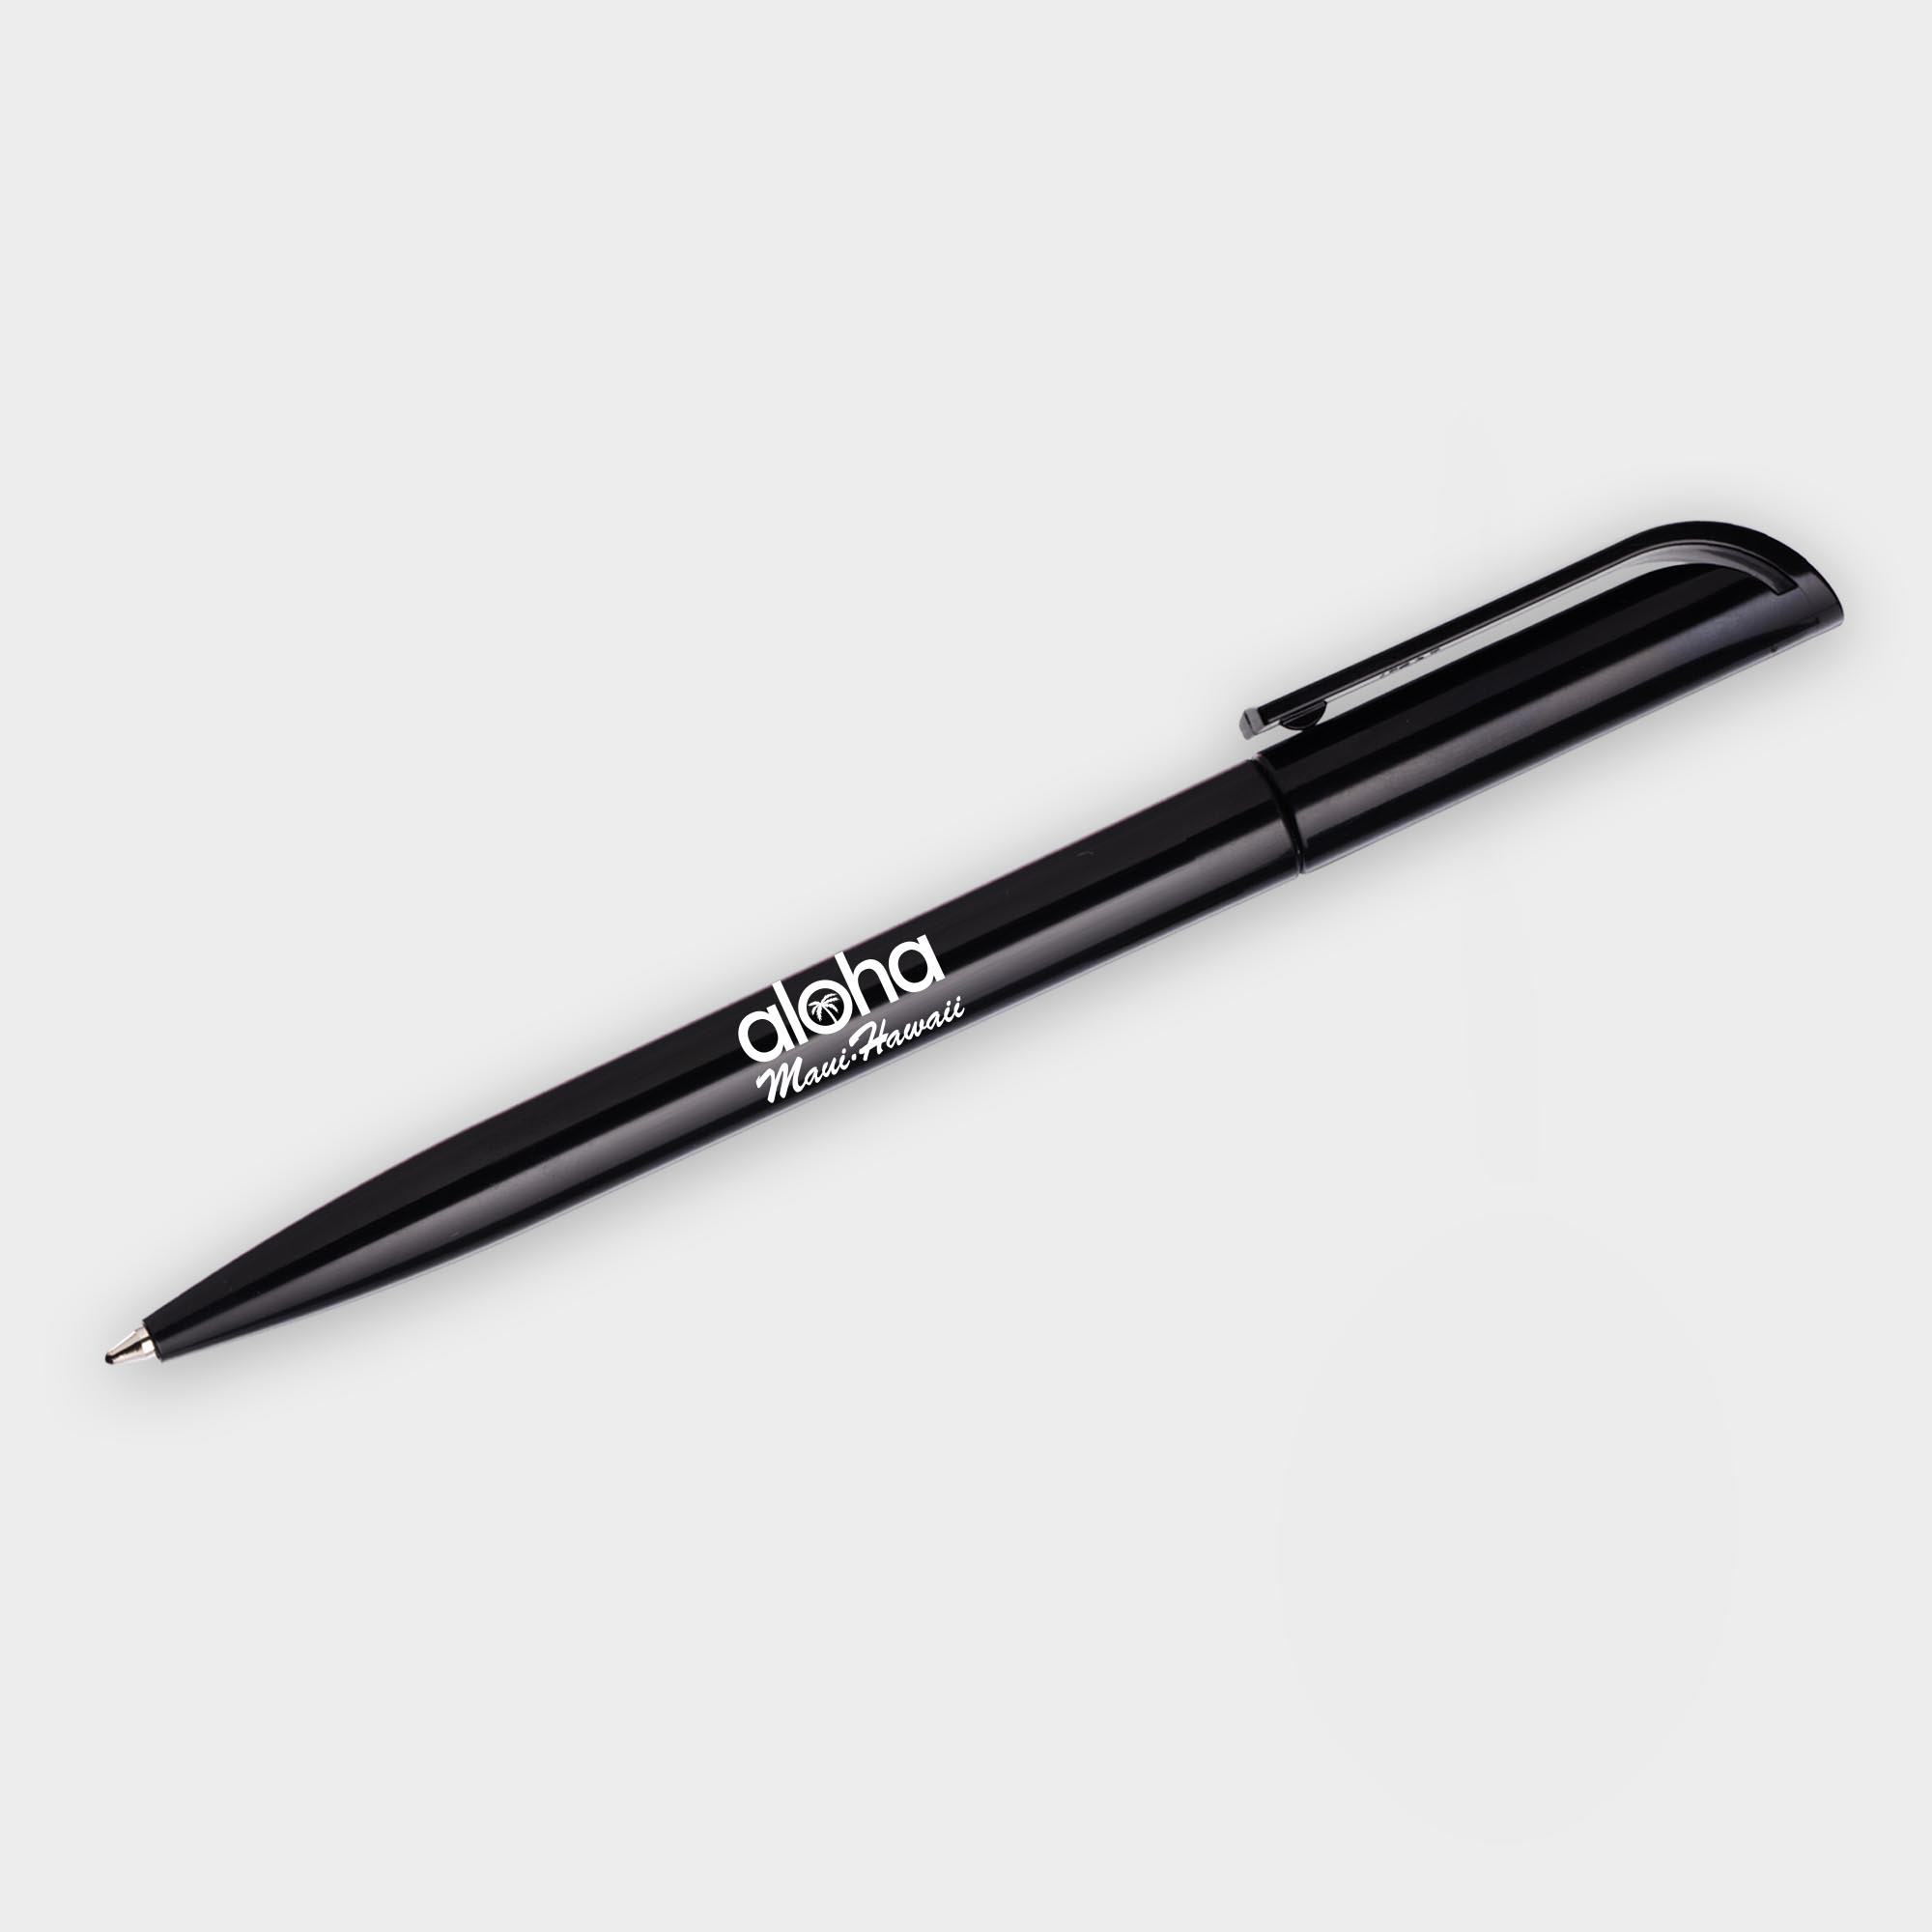 The Green & Good Eclipse Pen made from recycled CD cases. Twist action retractable pen, available in a variety of colours. Black ink as standard. Black